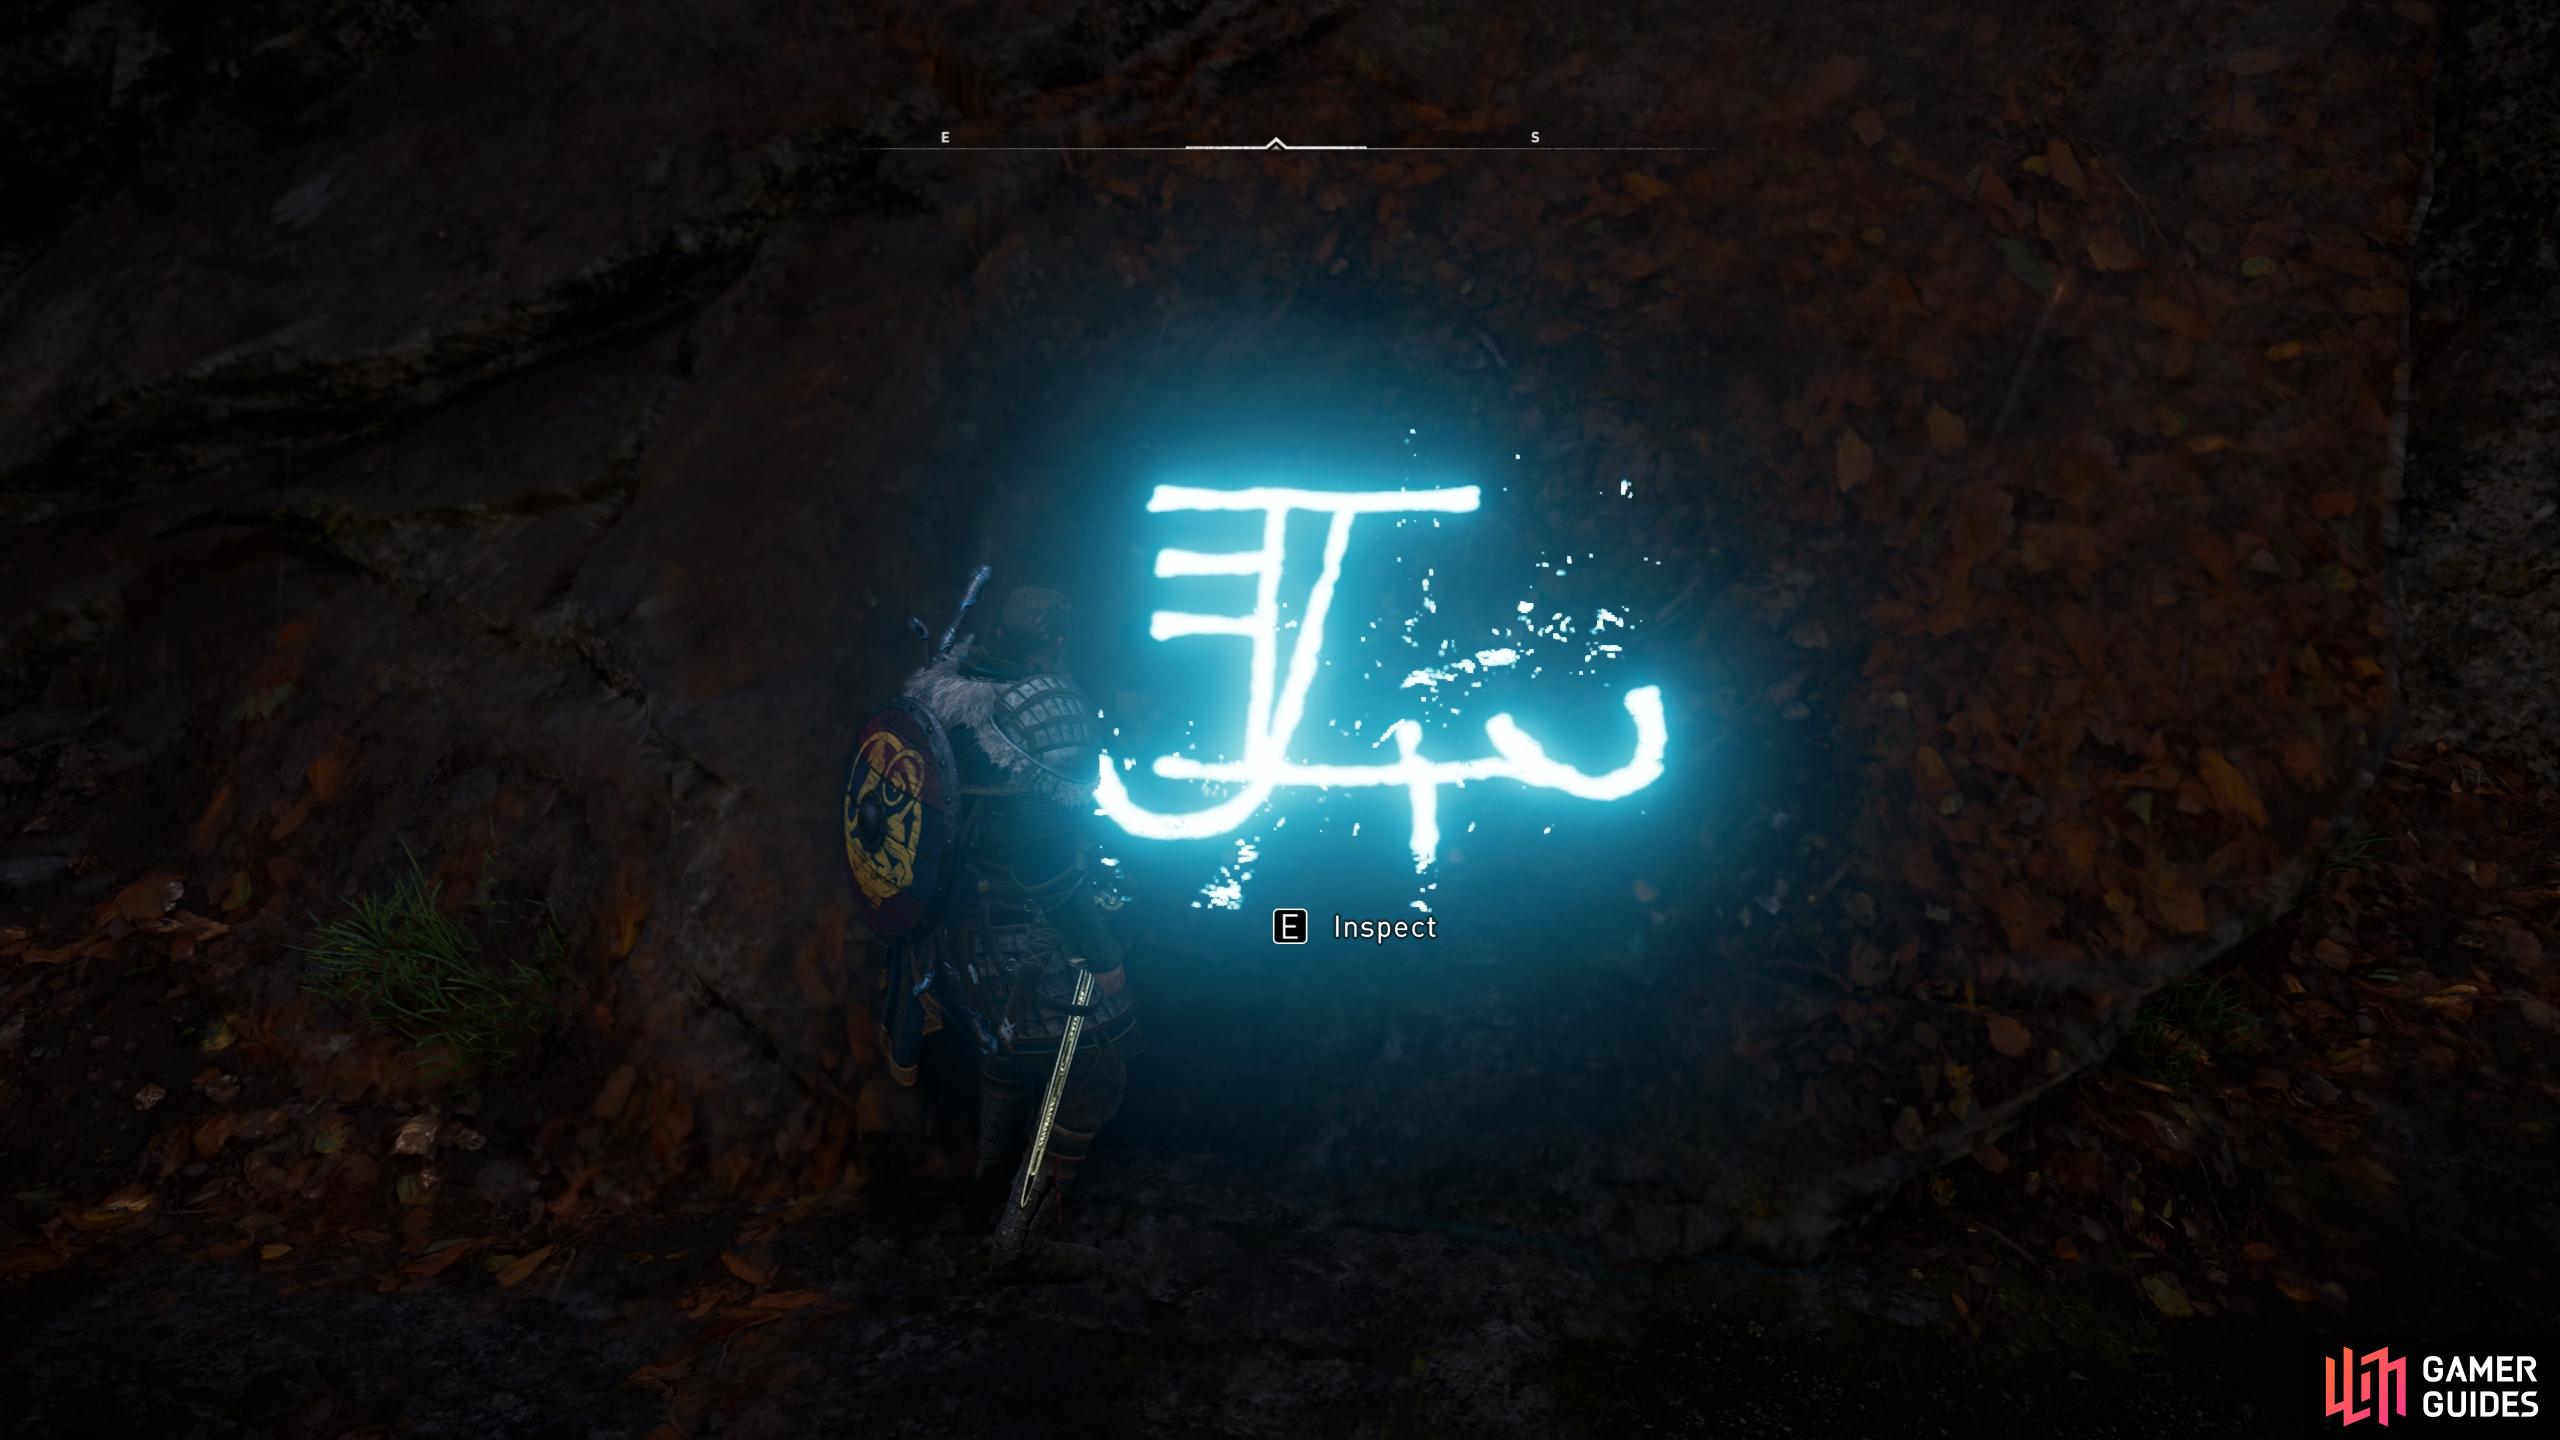 Youll need to interact with the runic inscription to uncover the entrance to the tomb.